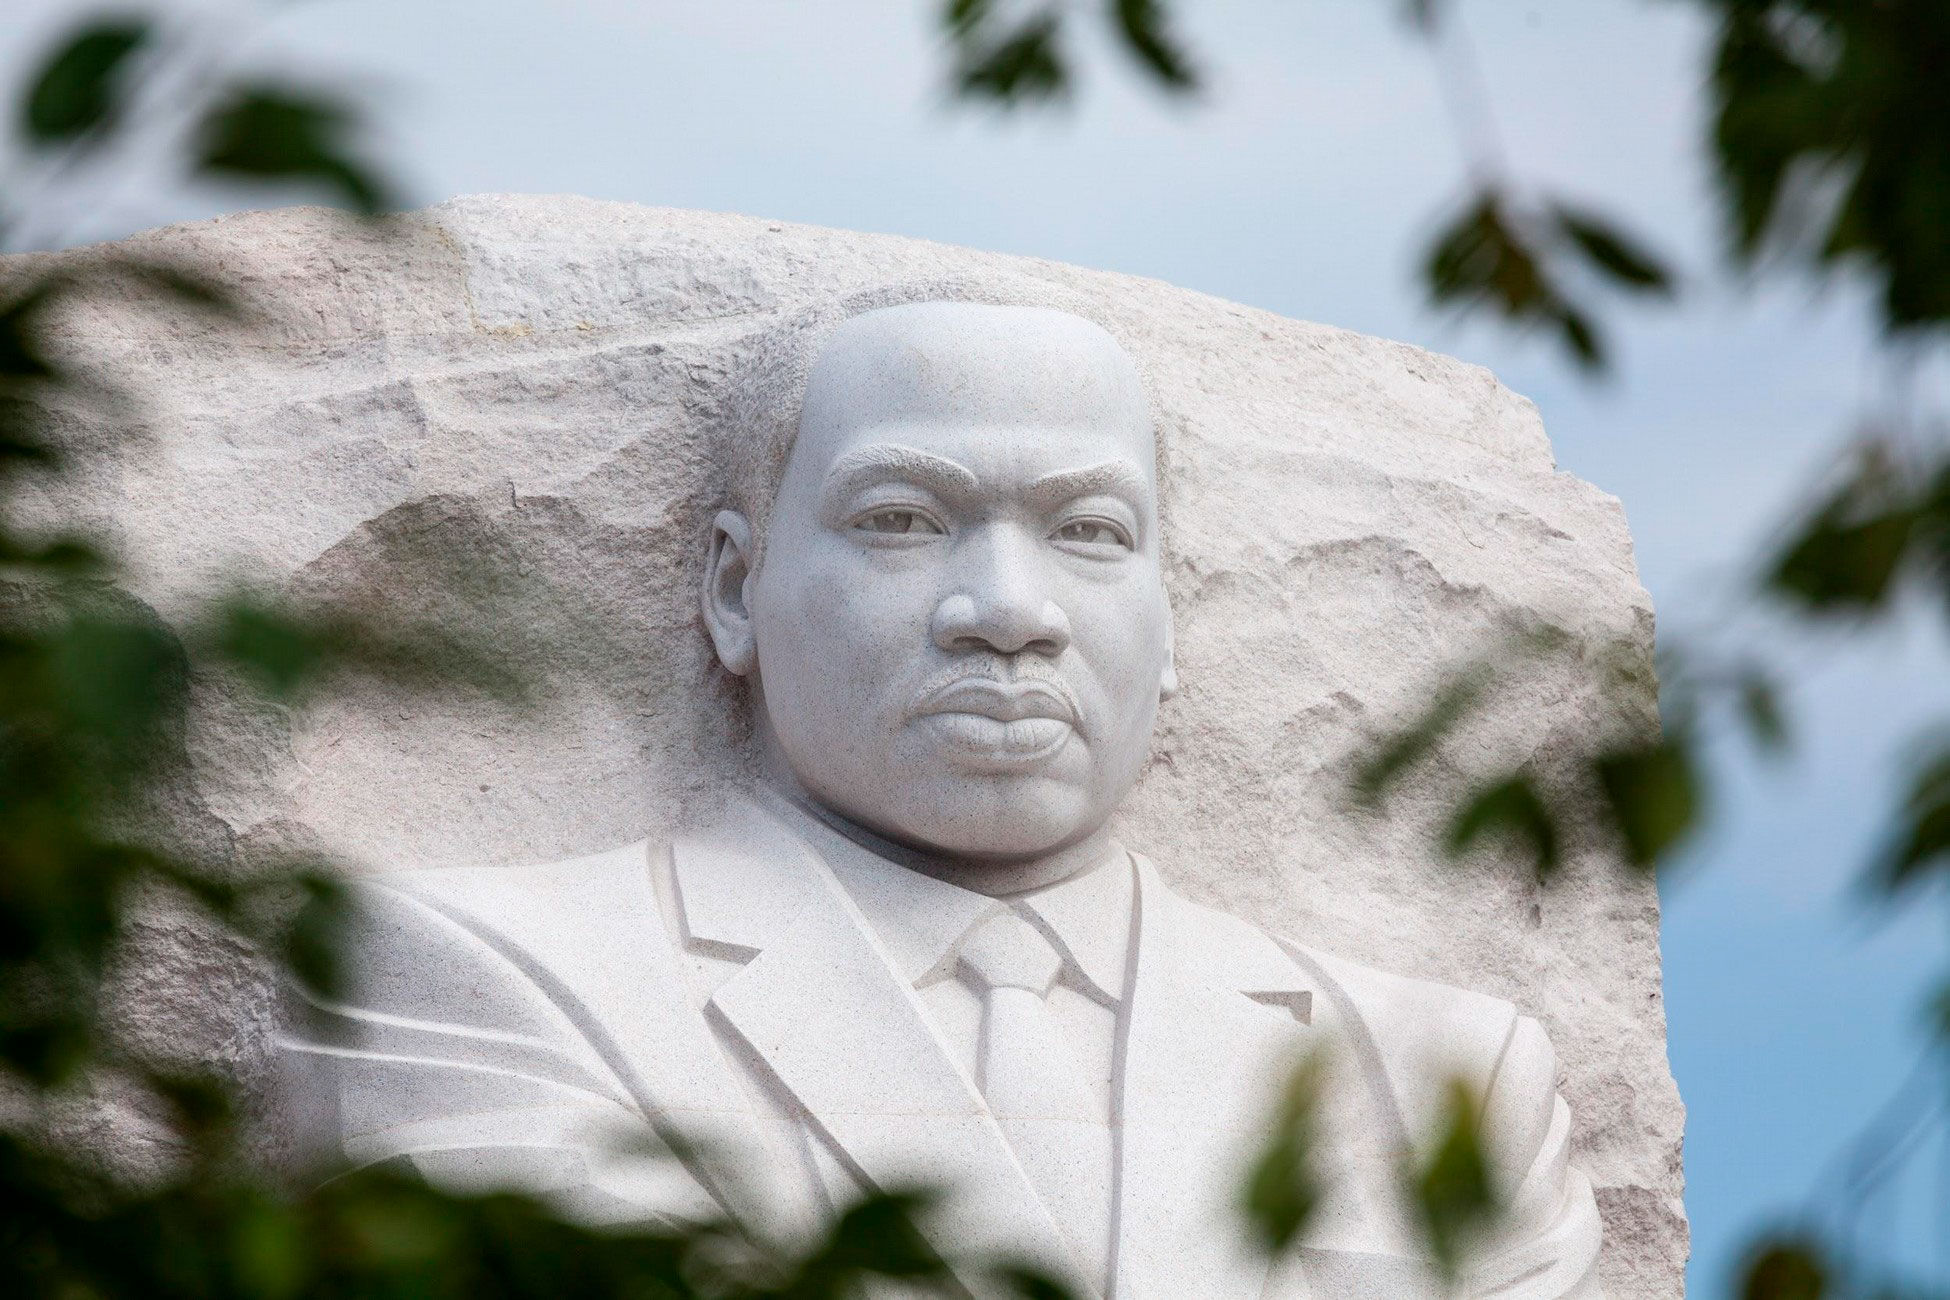 Civil Rights Sites and Destinations to Visit During MLK Day Weekend 